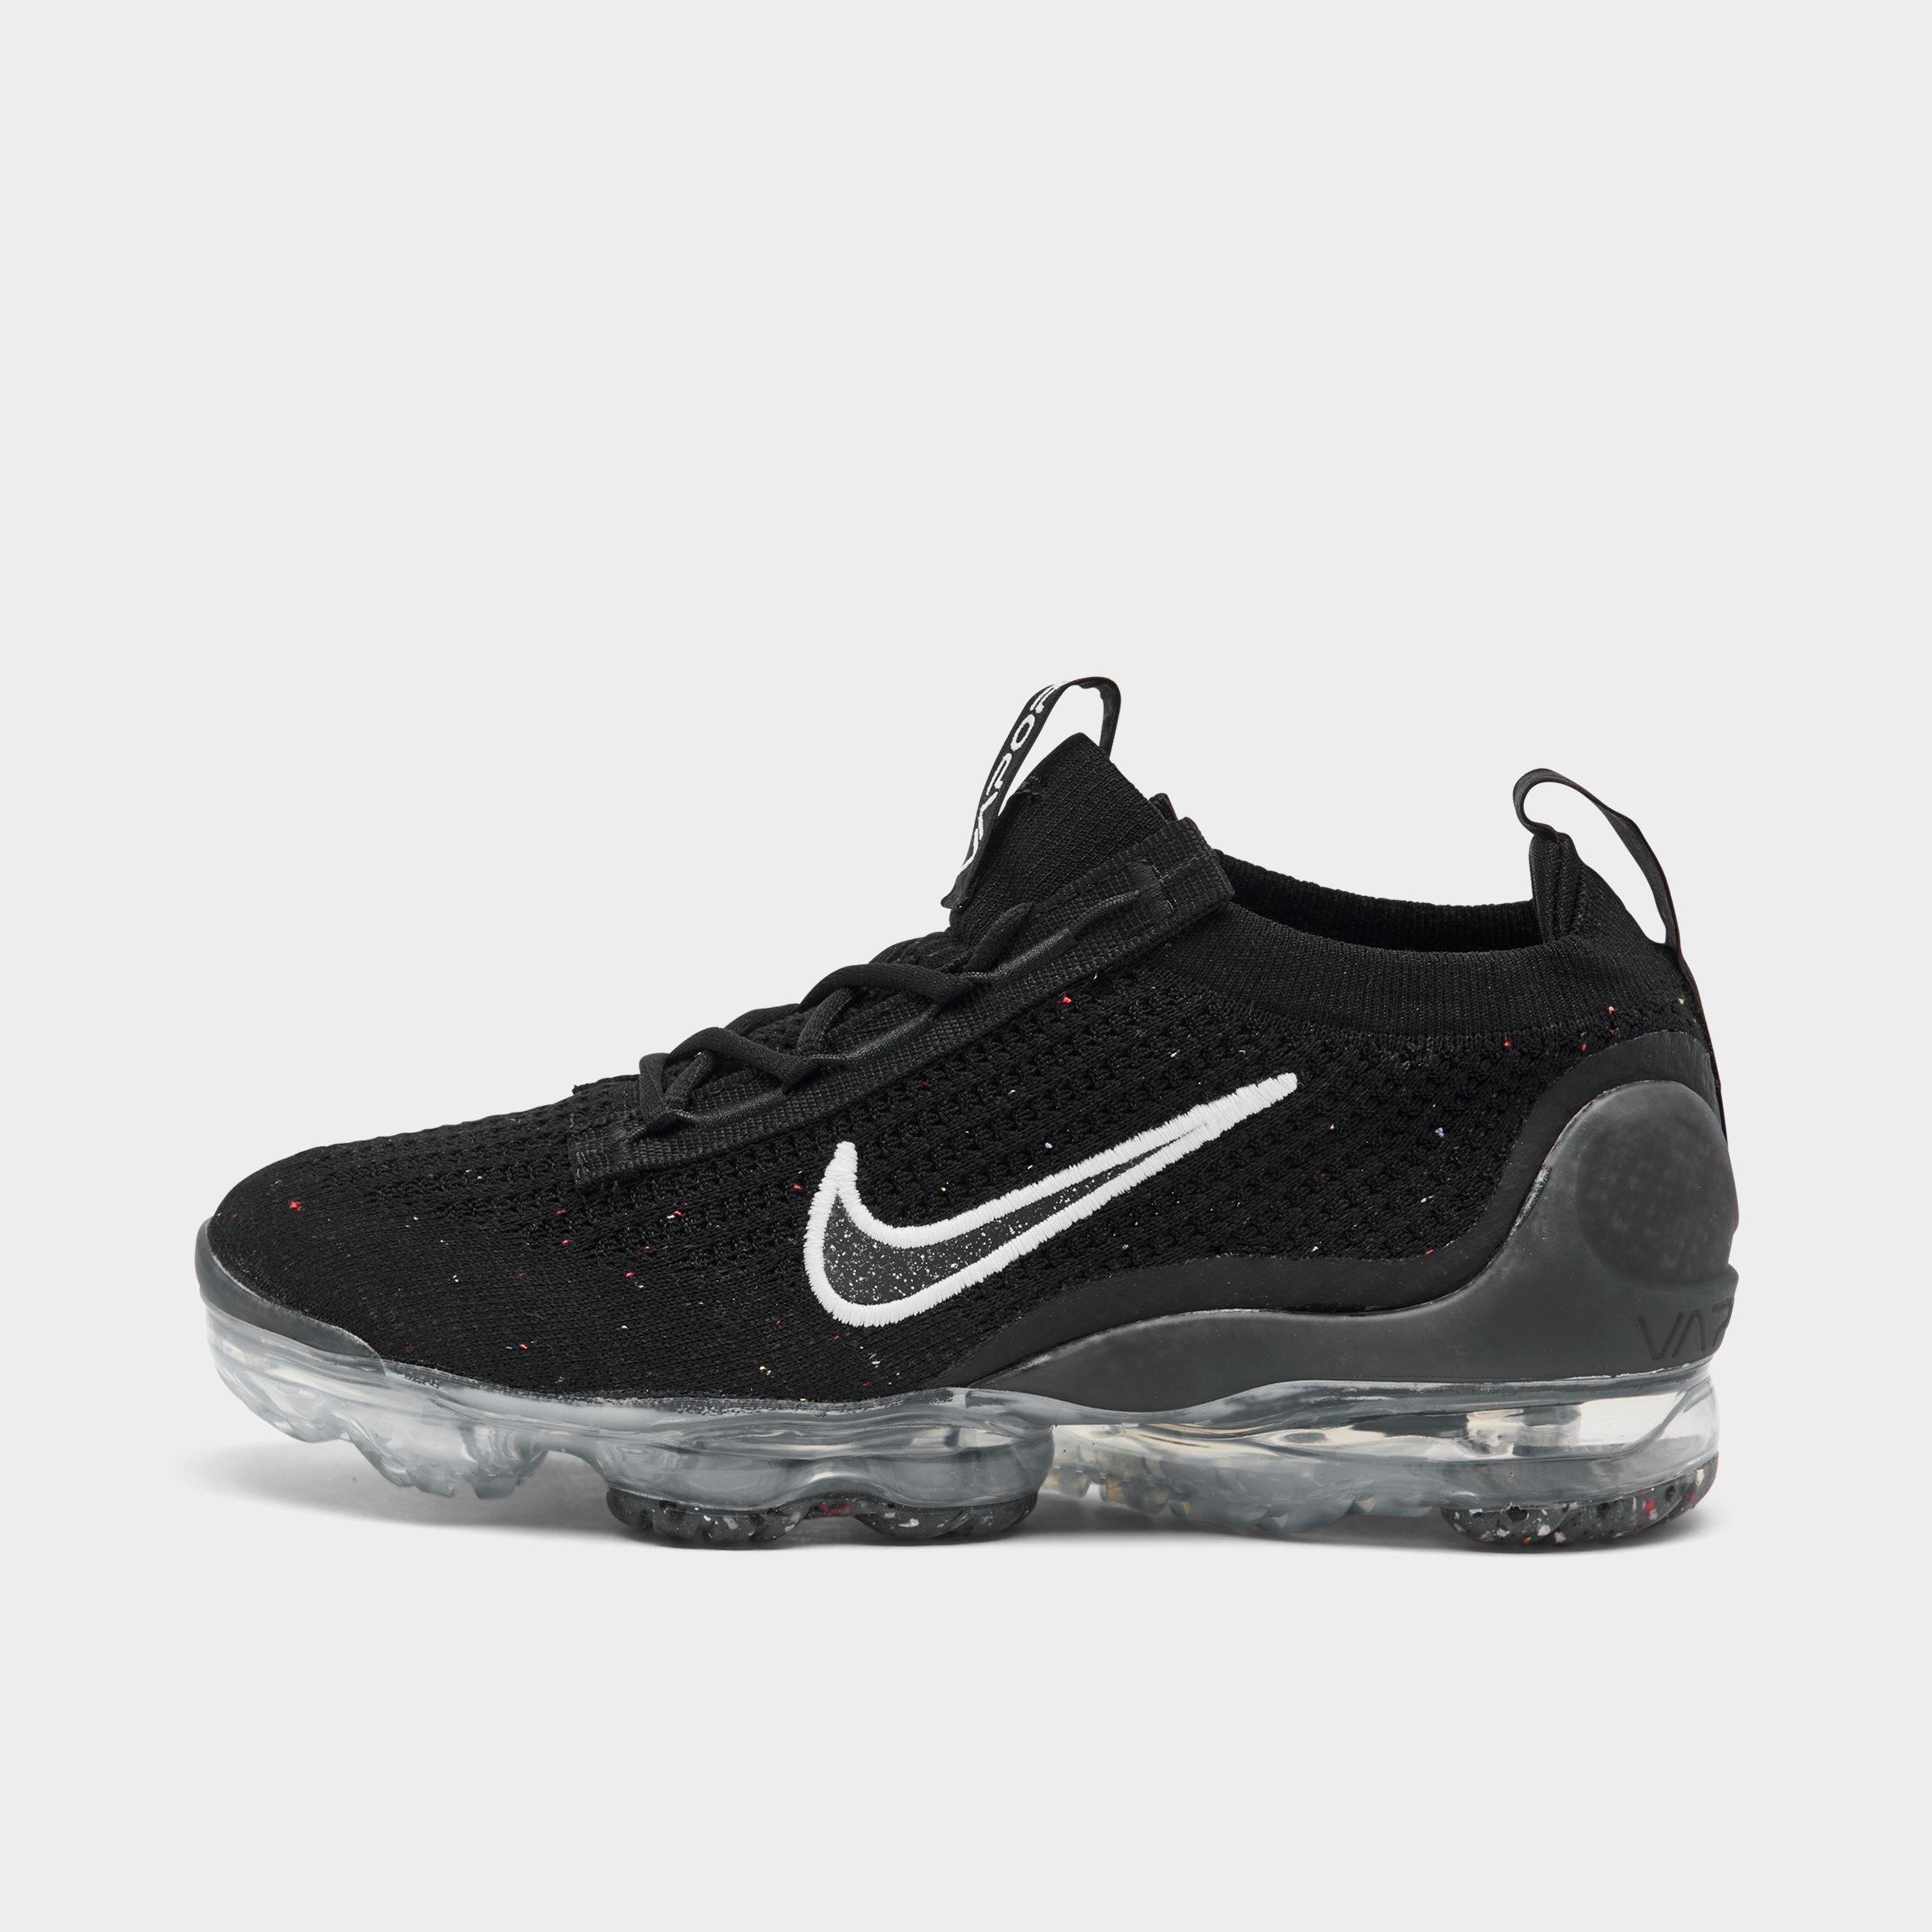 vapormax for women on sale